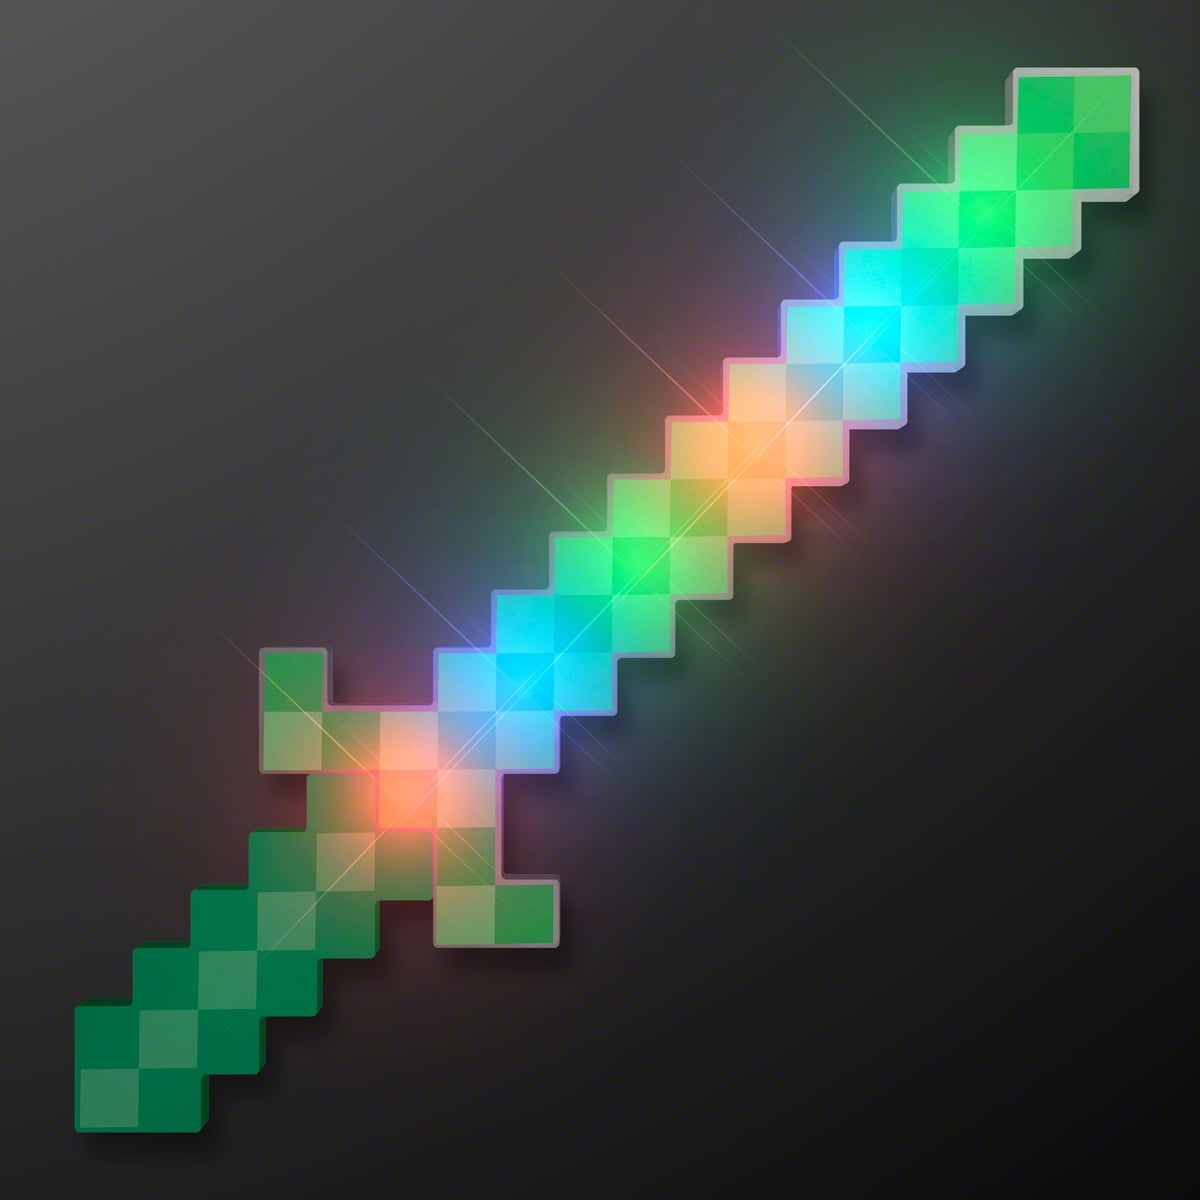 Pack of 18 Colorful Flashing Diamond Pixel Swords w/ Sound Wholesale Lot 